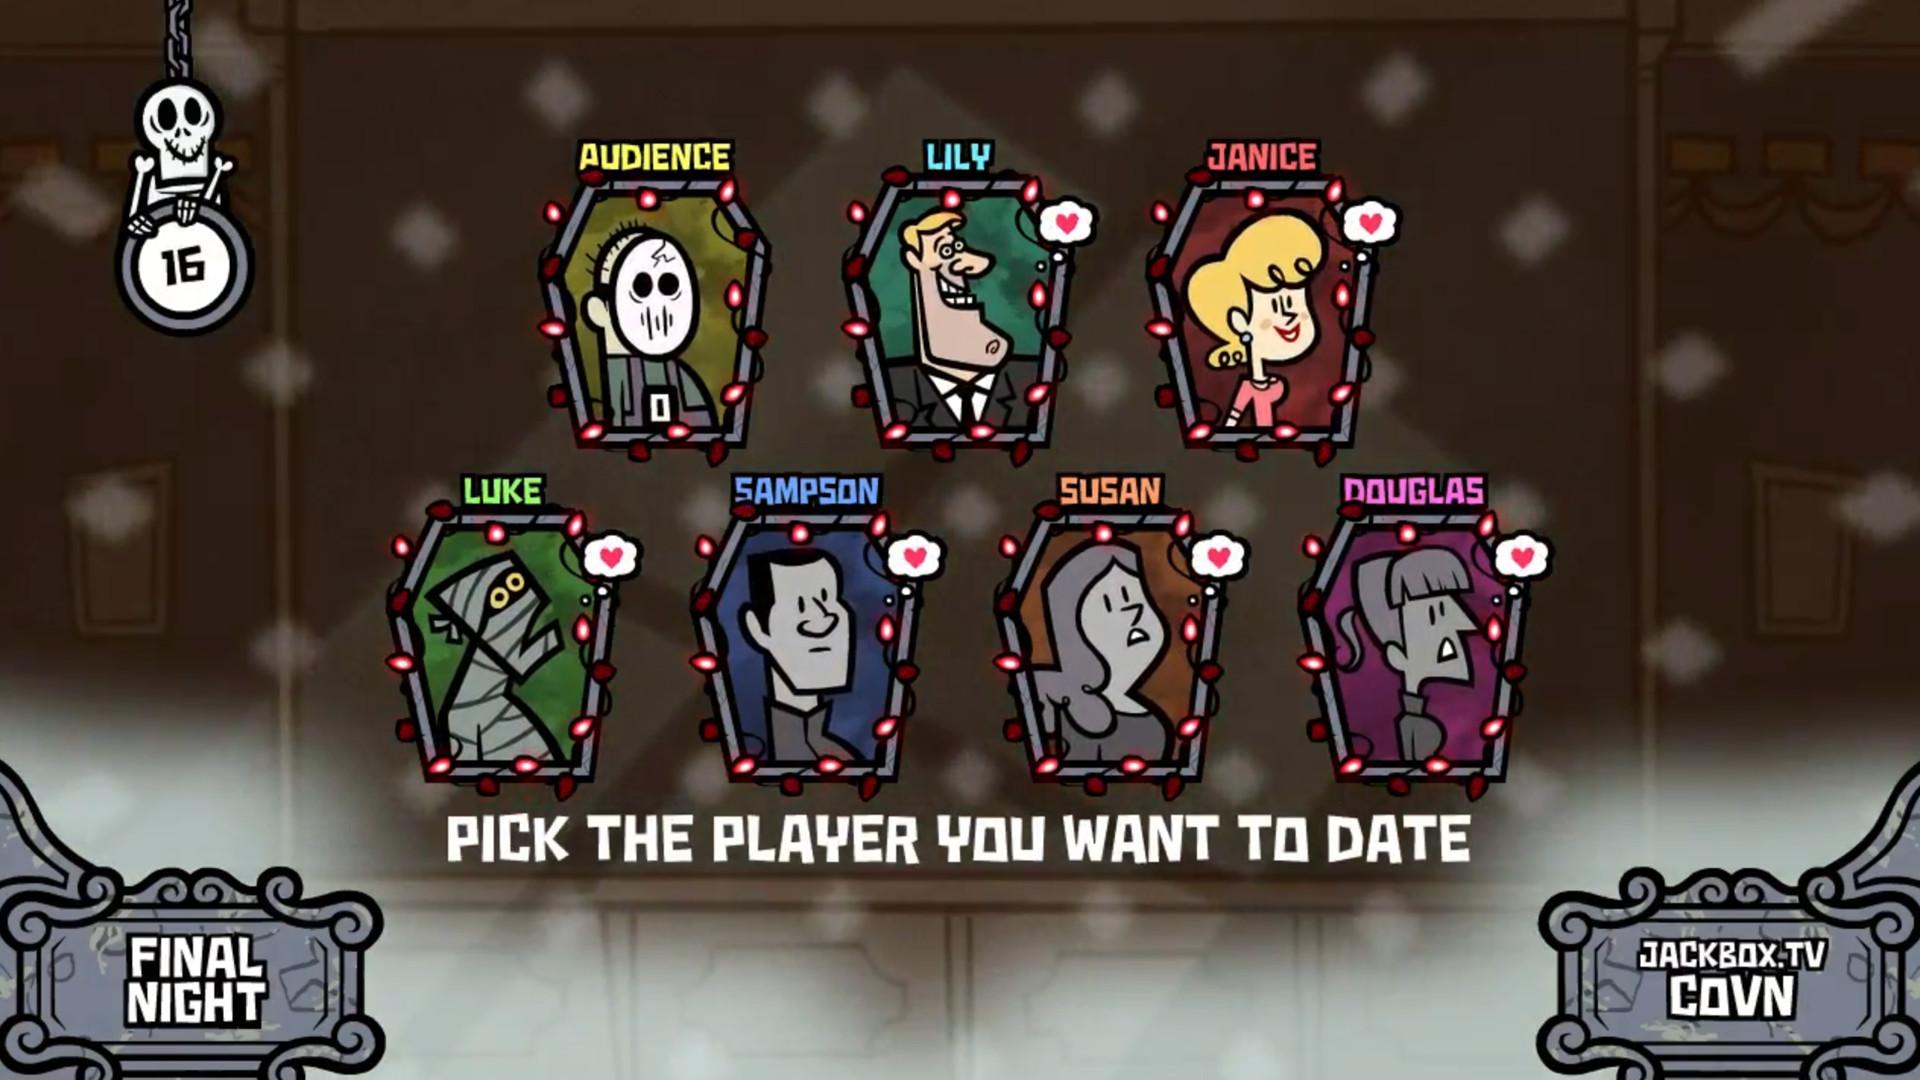 Screenshot №13 from game The Jackbox Party Pack 4